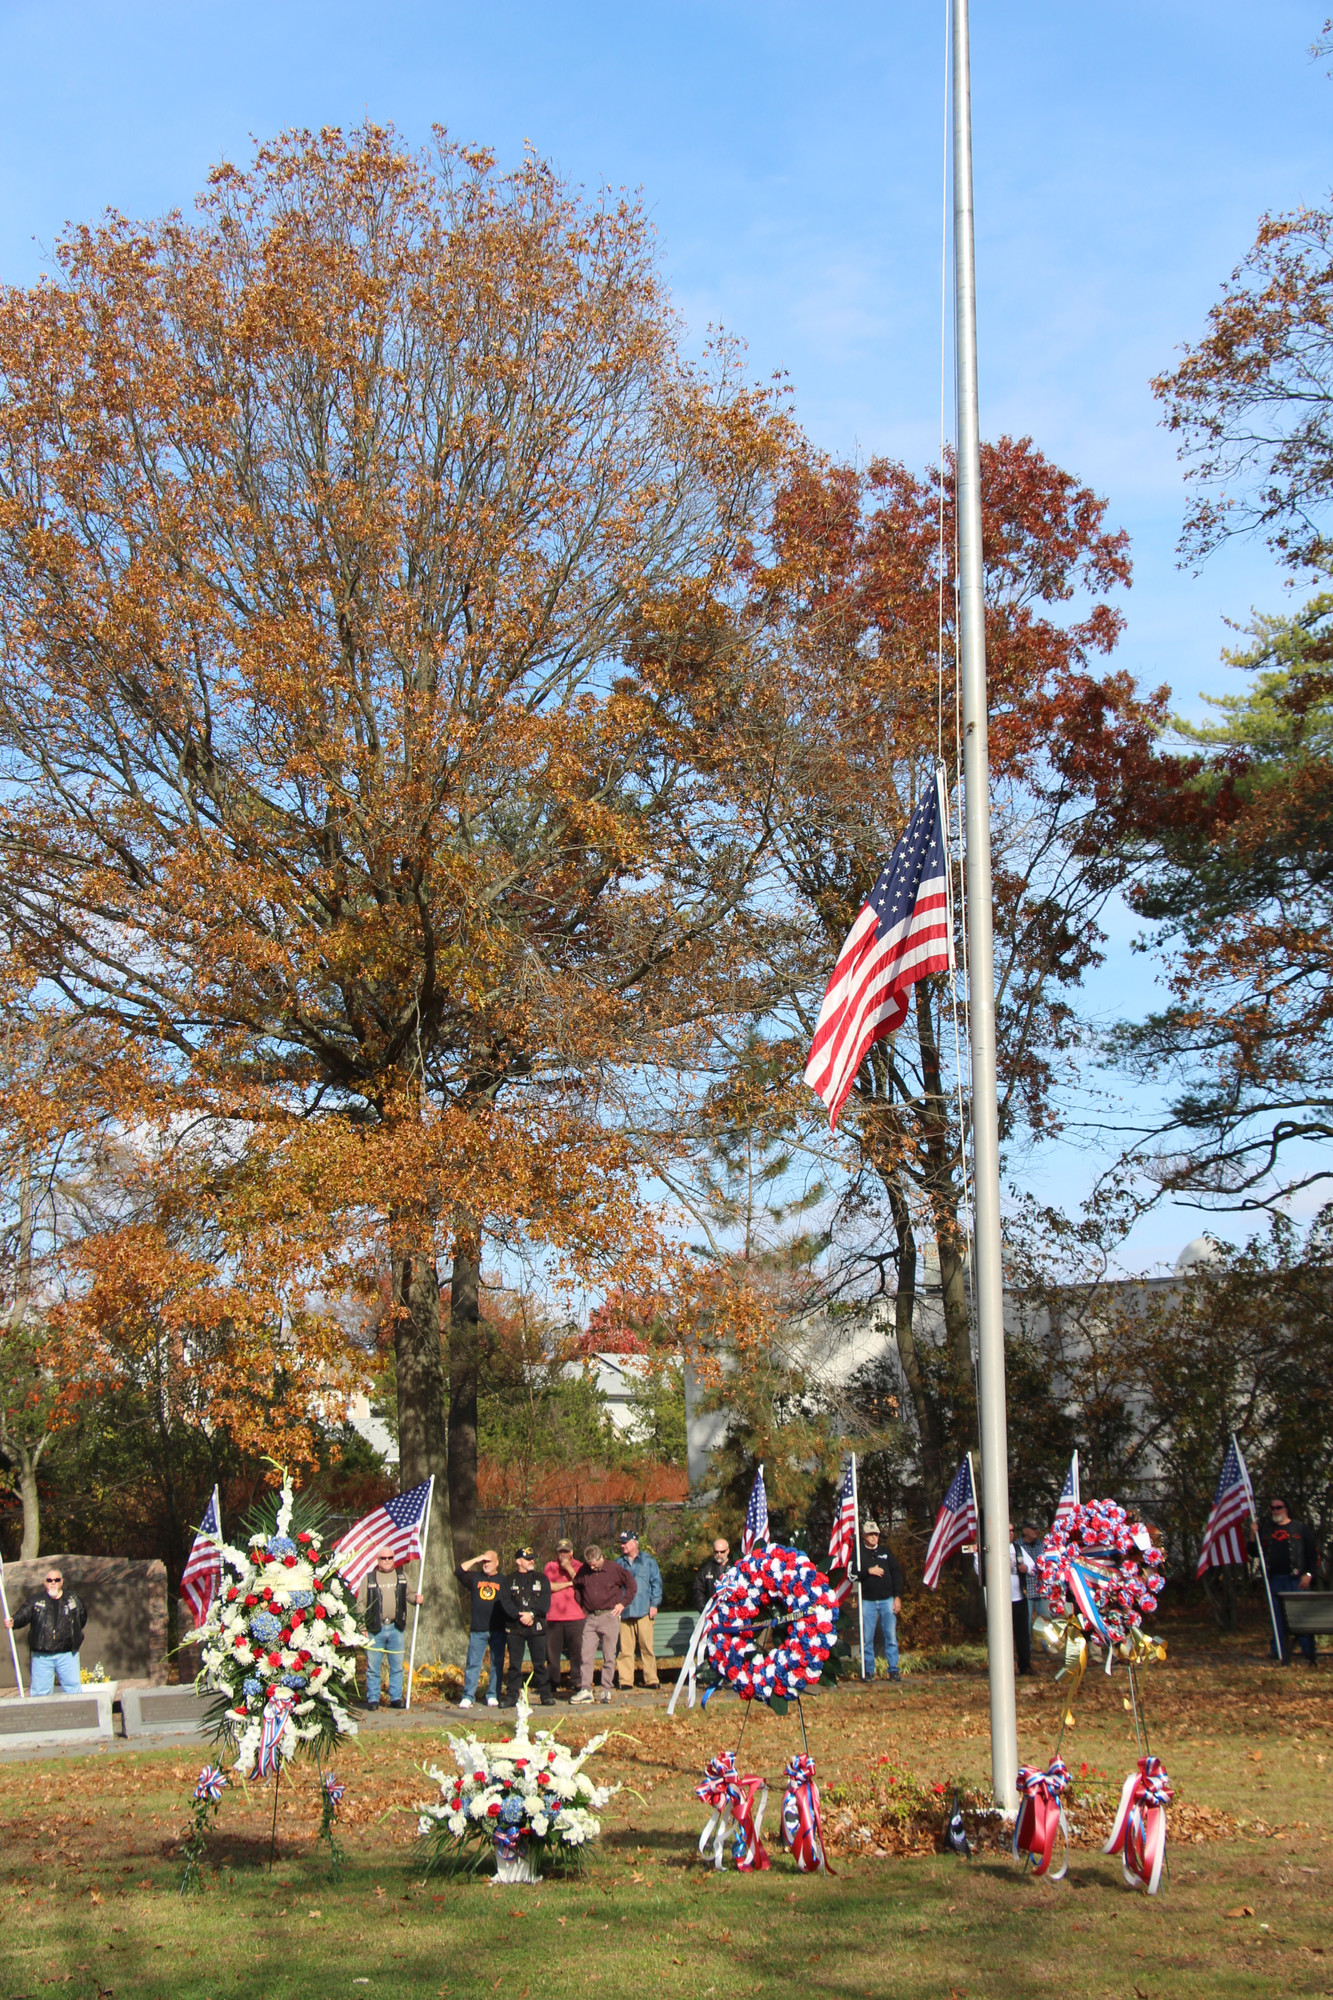 Wreaths were placed by the base of the flag pole.